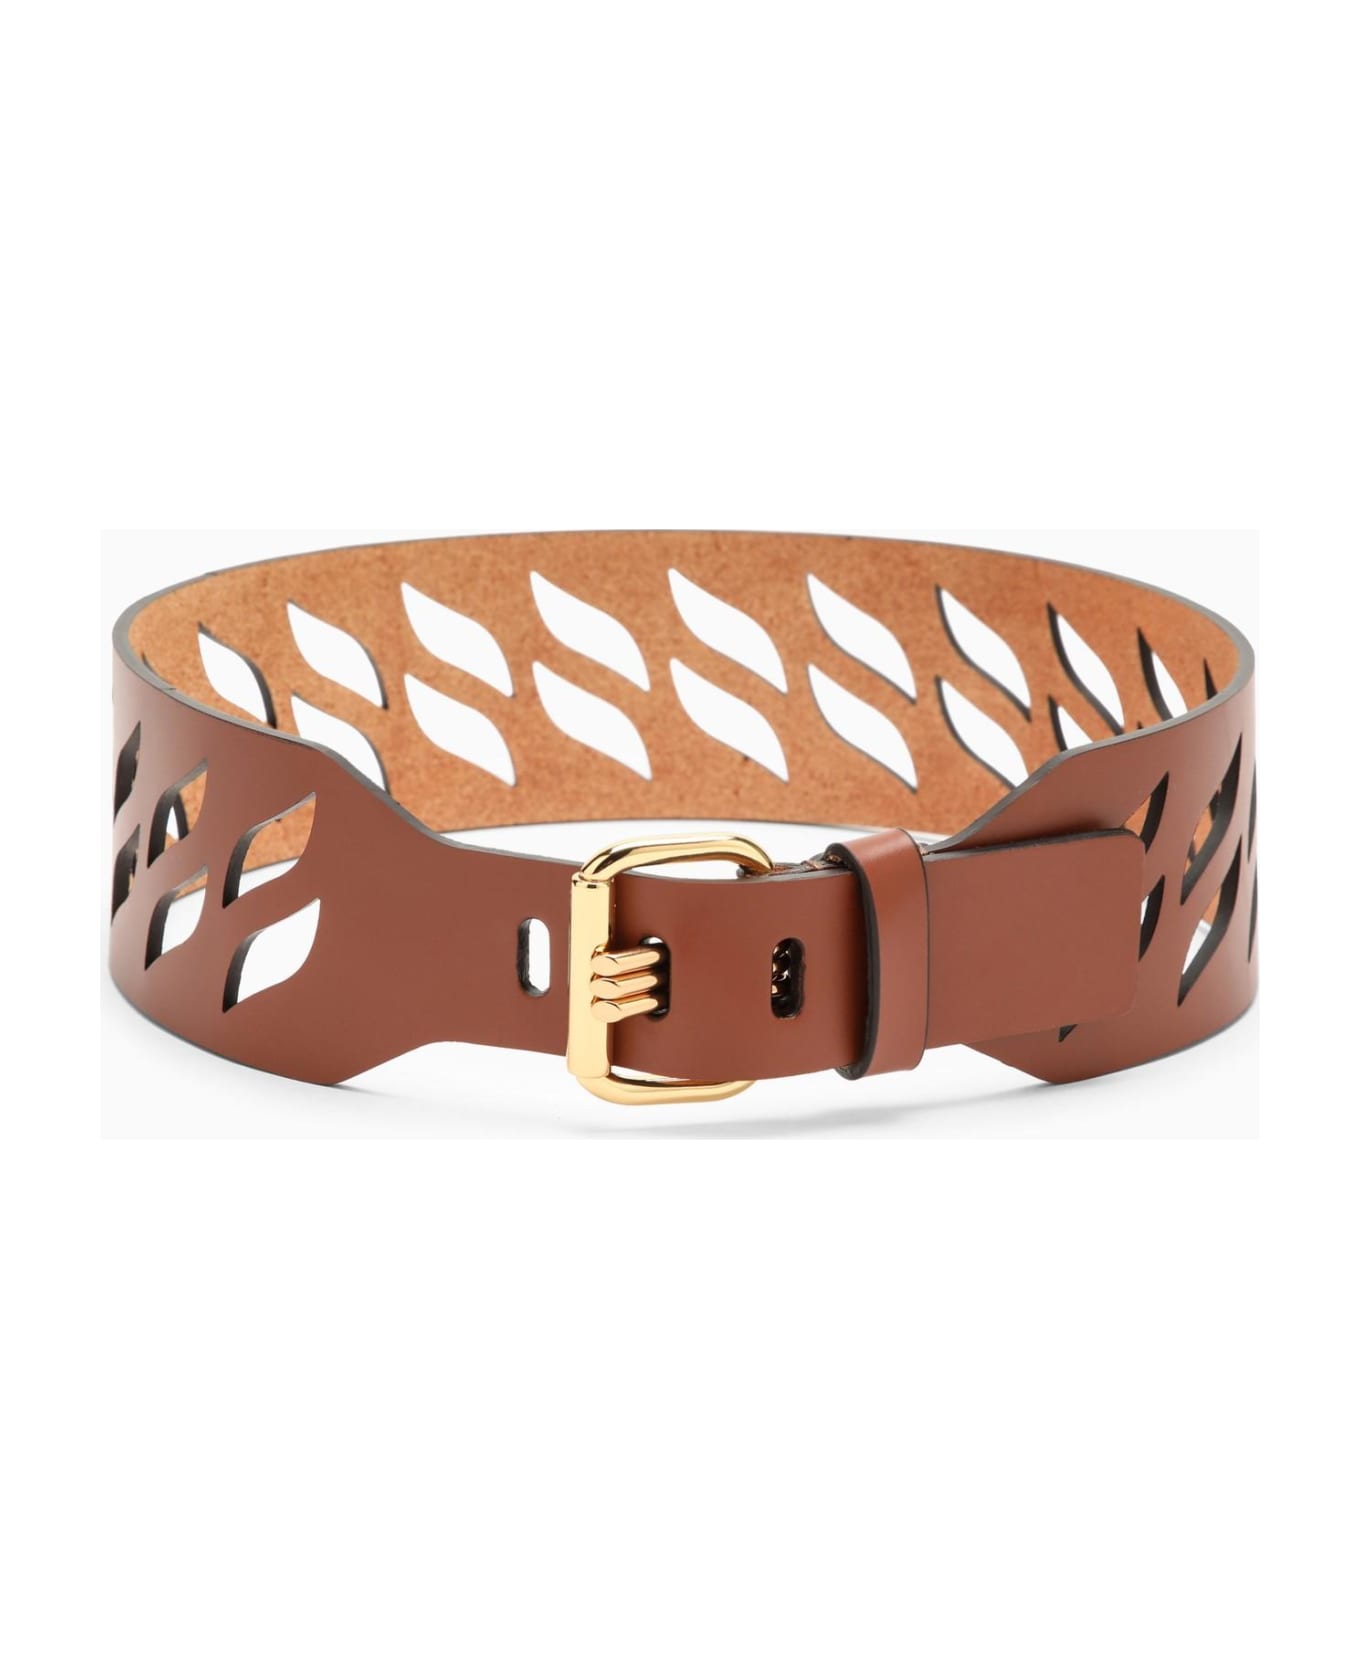 Etro Brown Perforated Leather Belt - Marrone ベルト